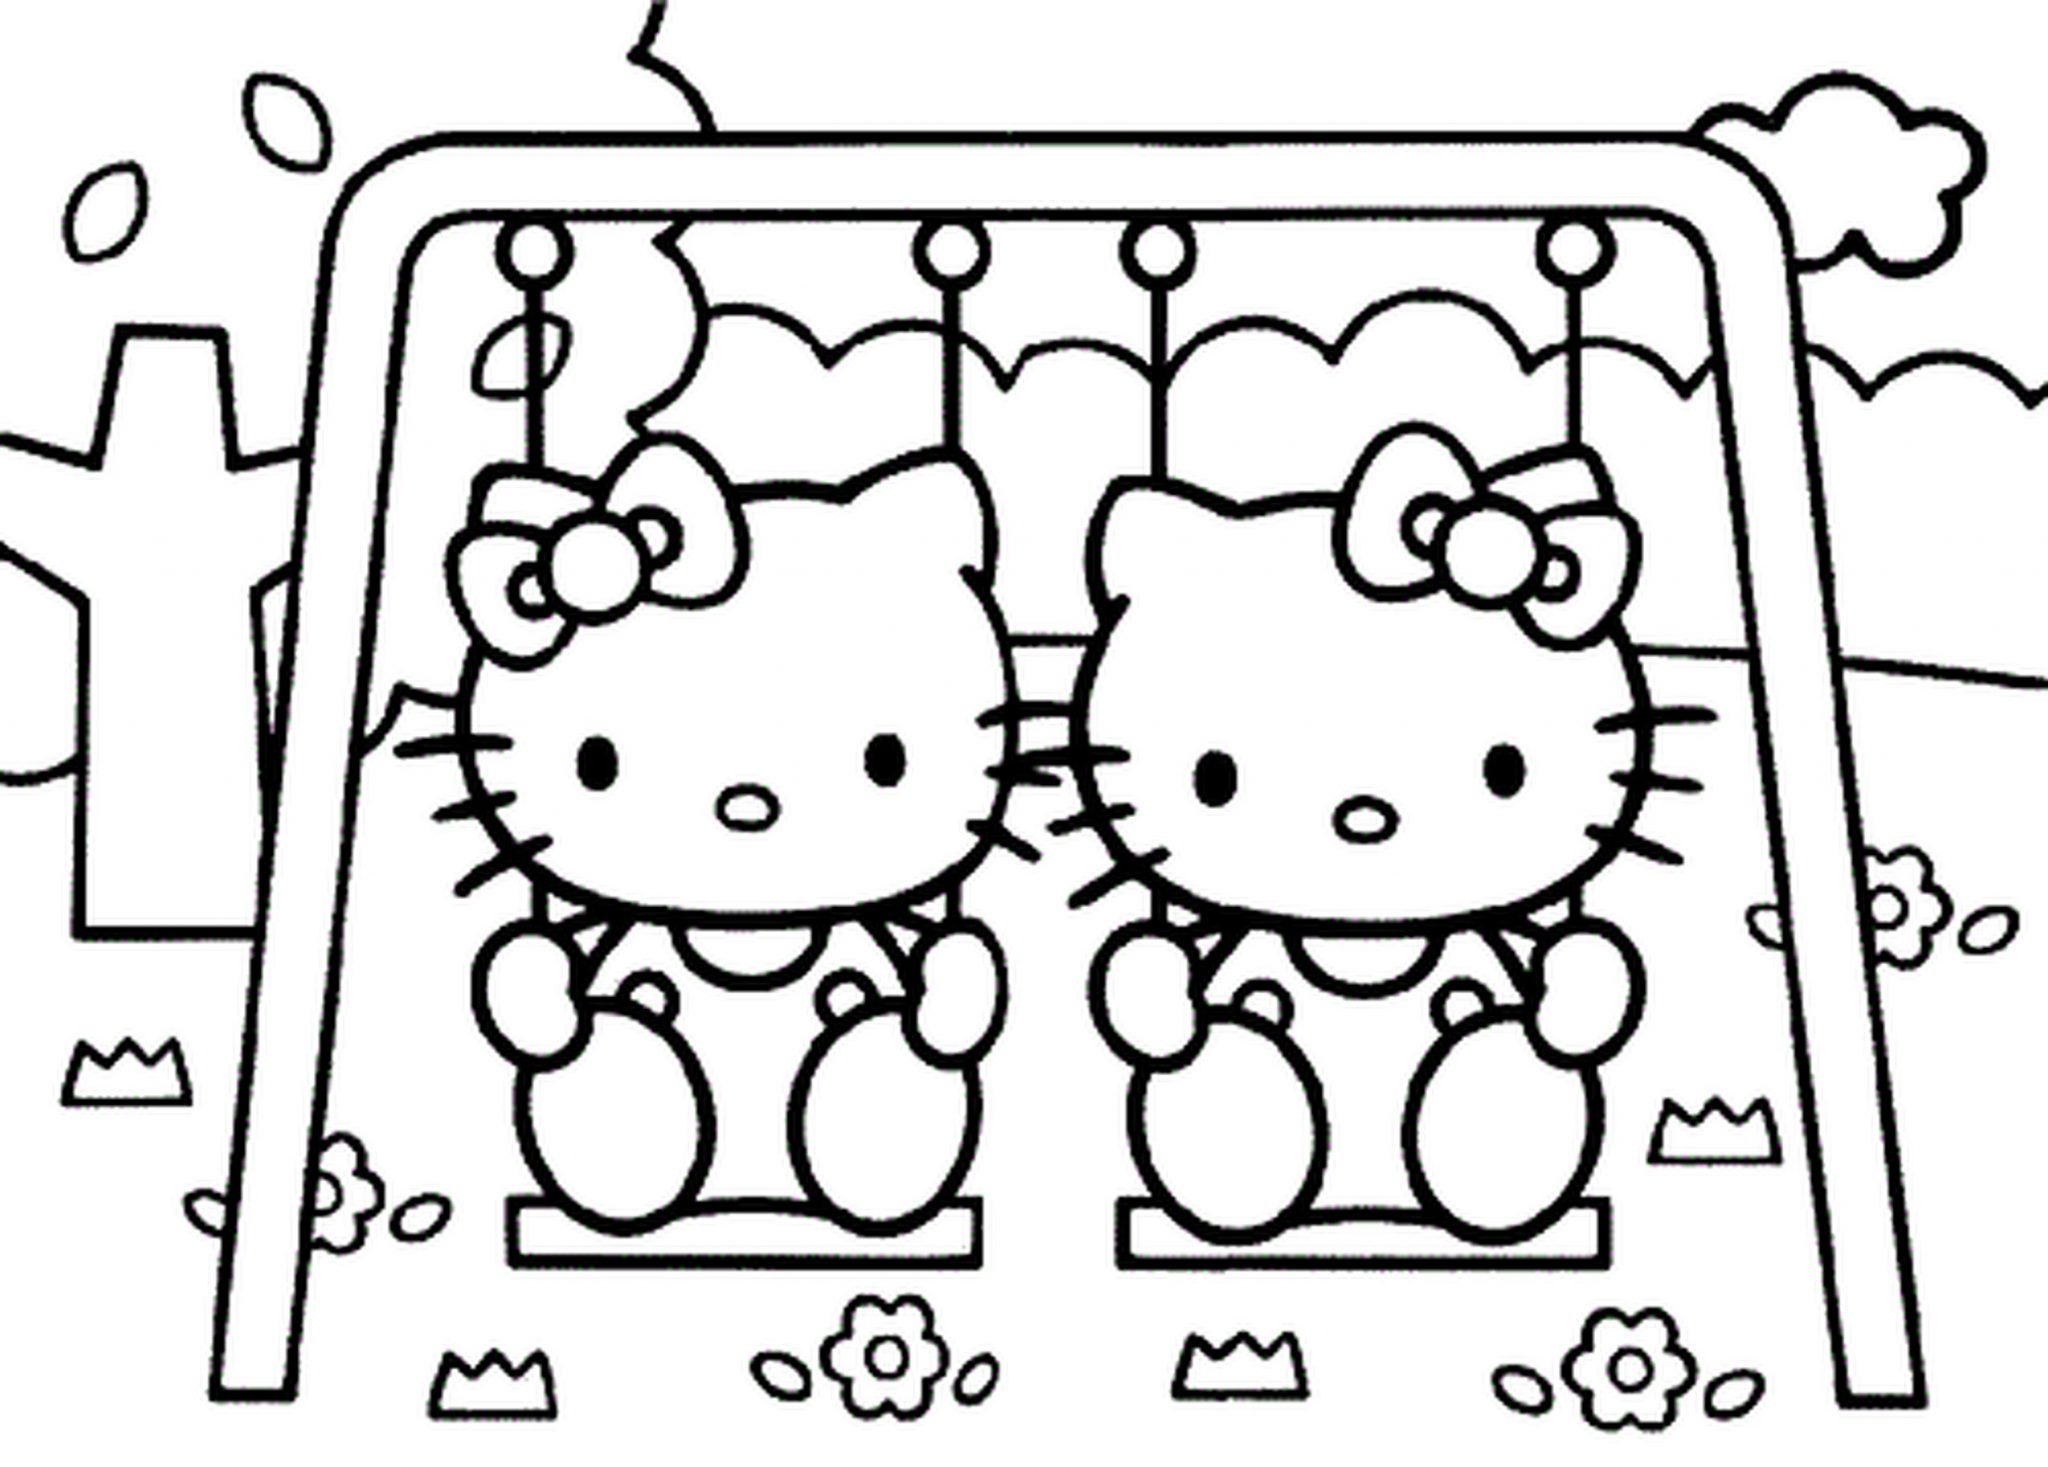 Coloring For Little Girls Hello Kitty Black Girl Coloring Pages Coloring  page fun boy spongebob coloring cat and dog pictures to color vintage  coloring books fire engine colouring Be smart people